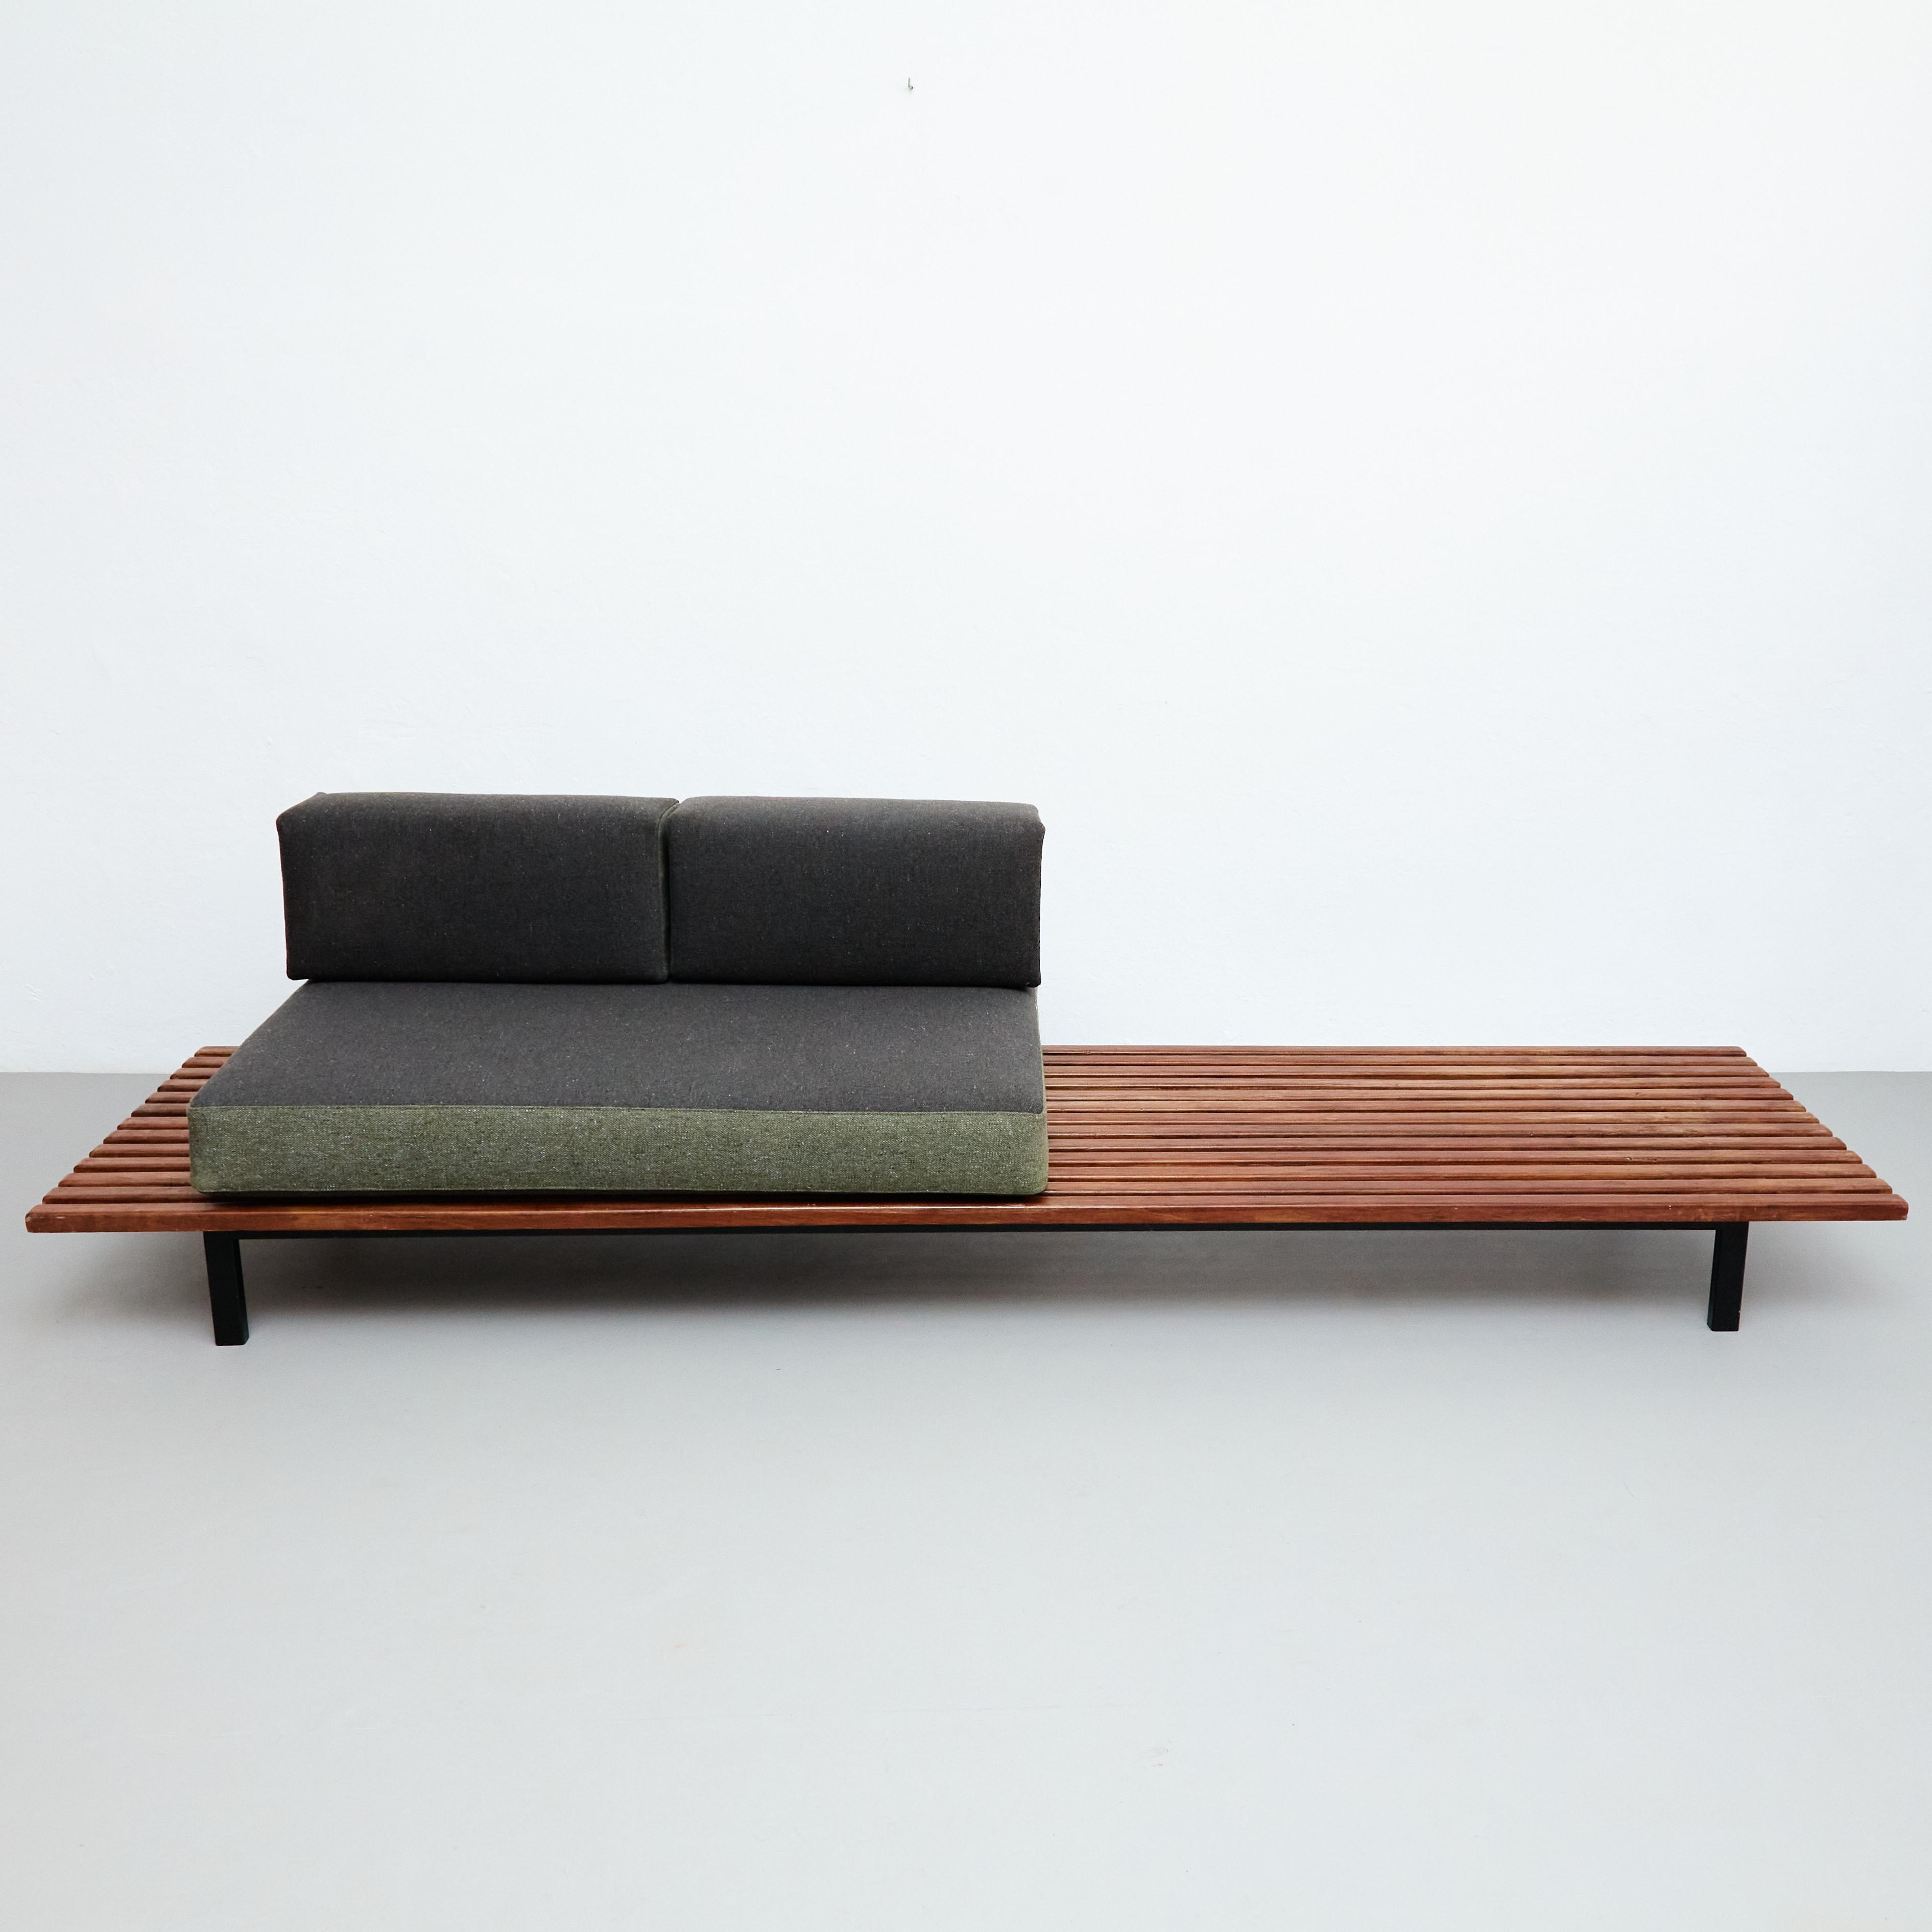 Bench designed by Charlotte Perriand.
Edited by Steph Simon.

Provenance: Cansado, Mauritania (Africa).

In original condition with minor wear consistent of age and use, preserving a beautiful patina.

Materials: 
Wood, metal,